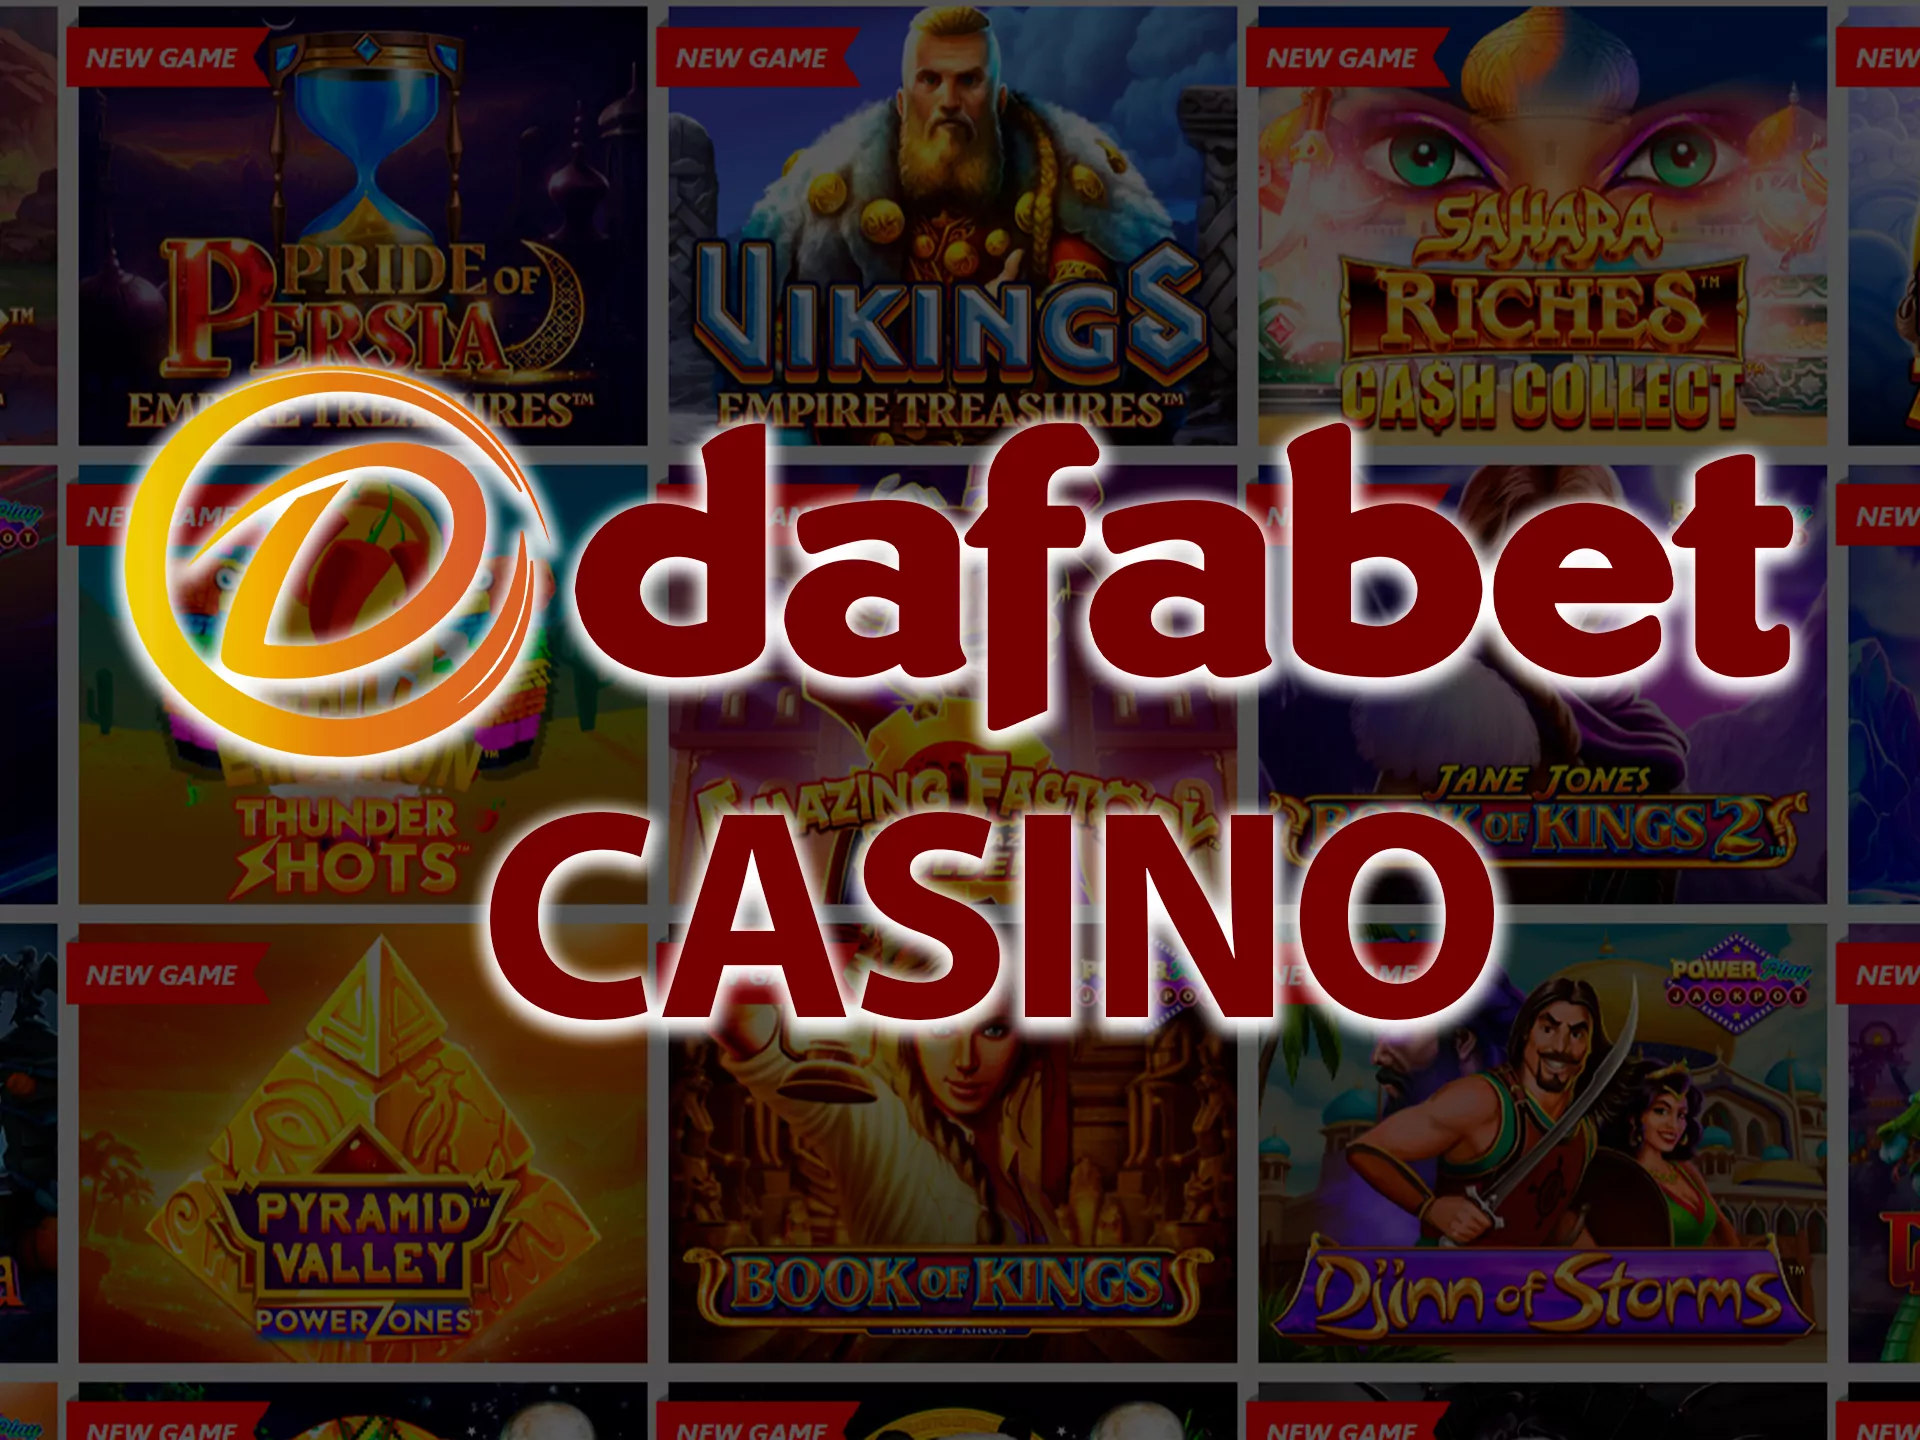 Dafabet online casino operates officially in India.